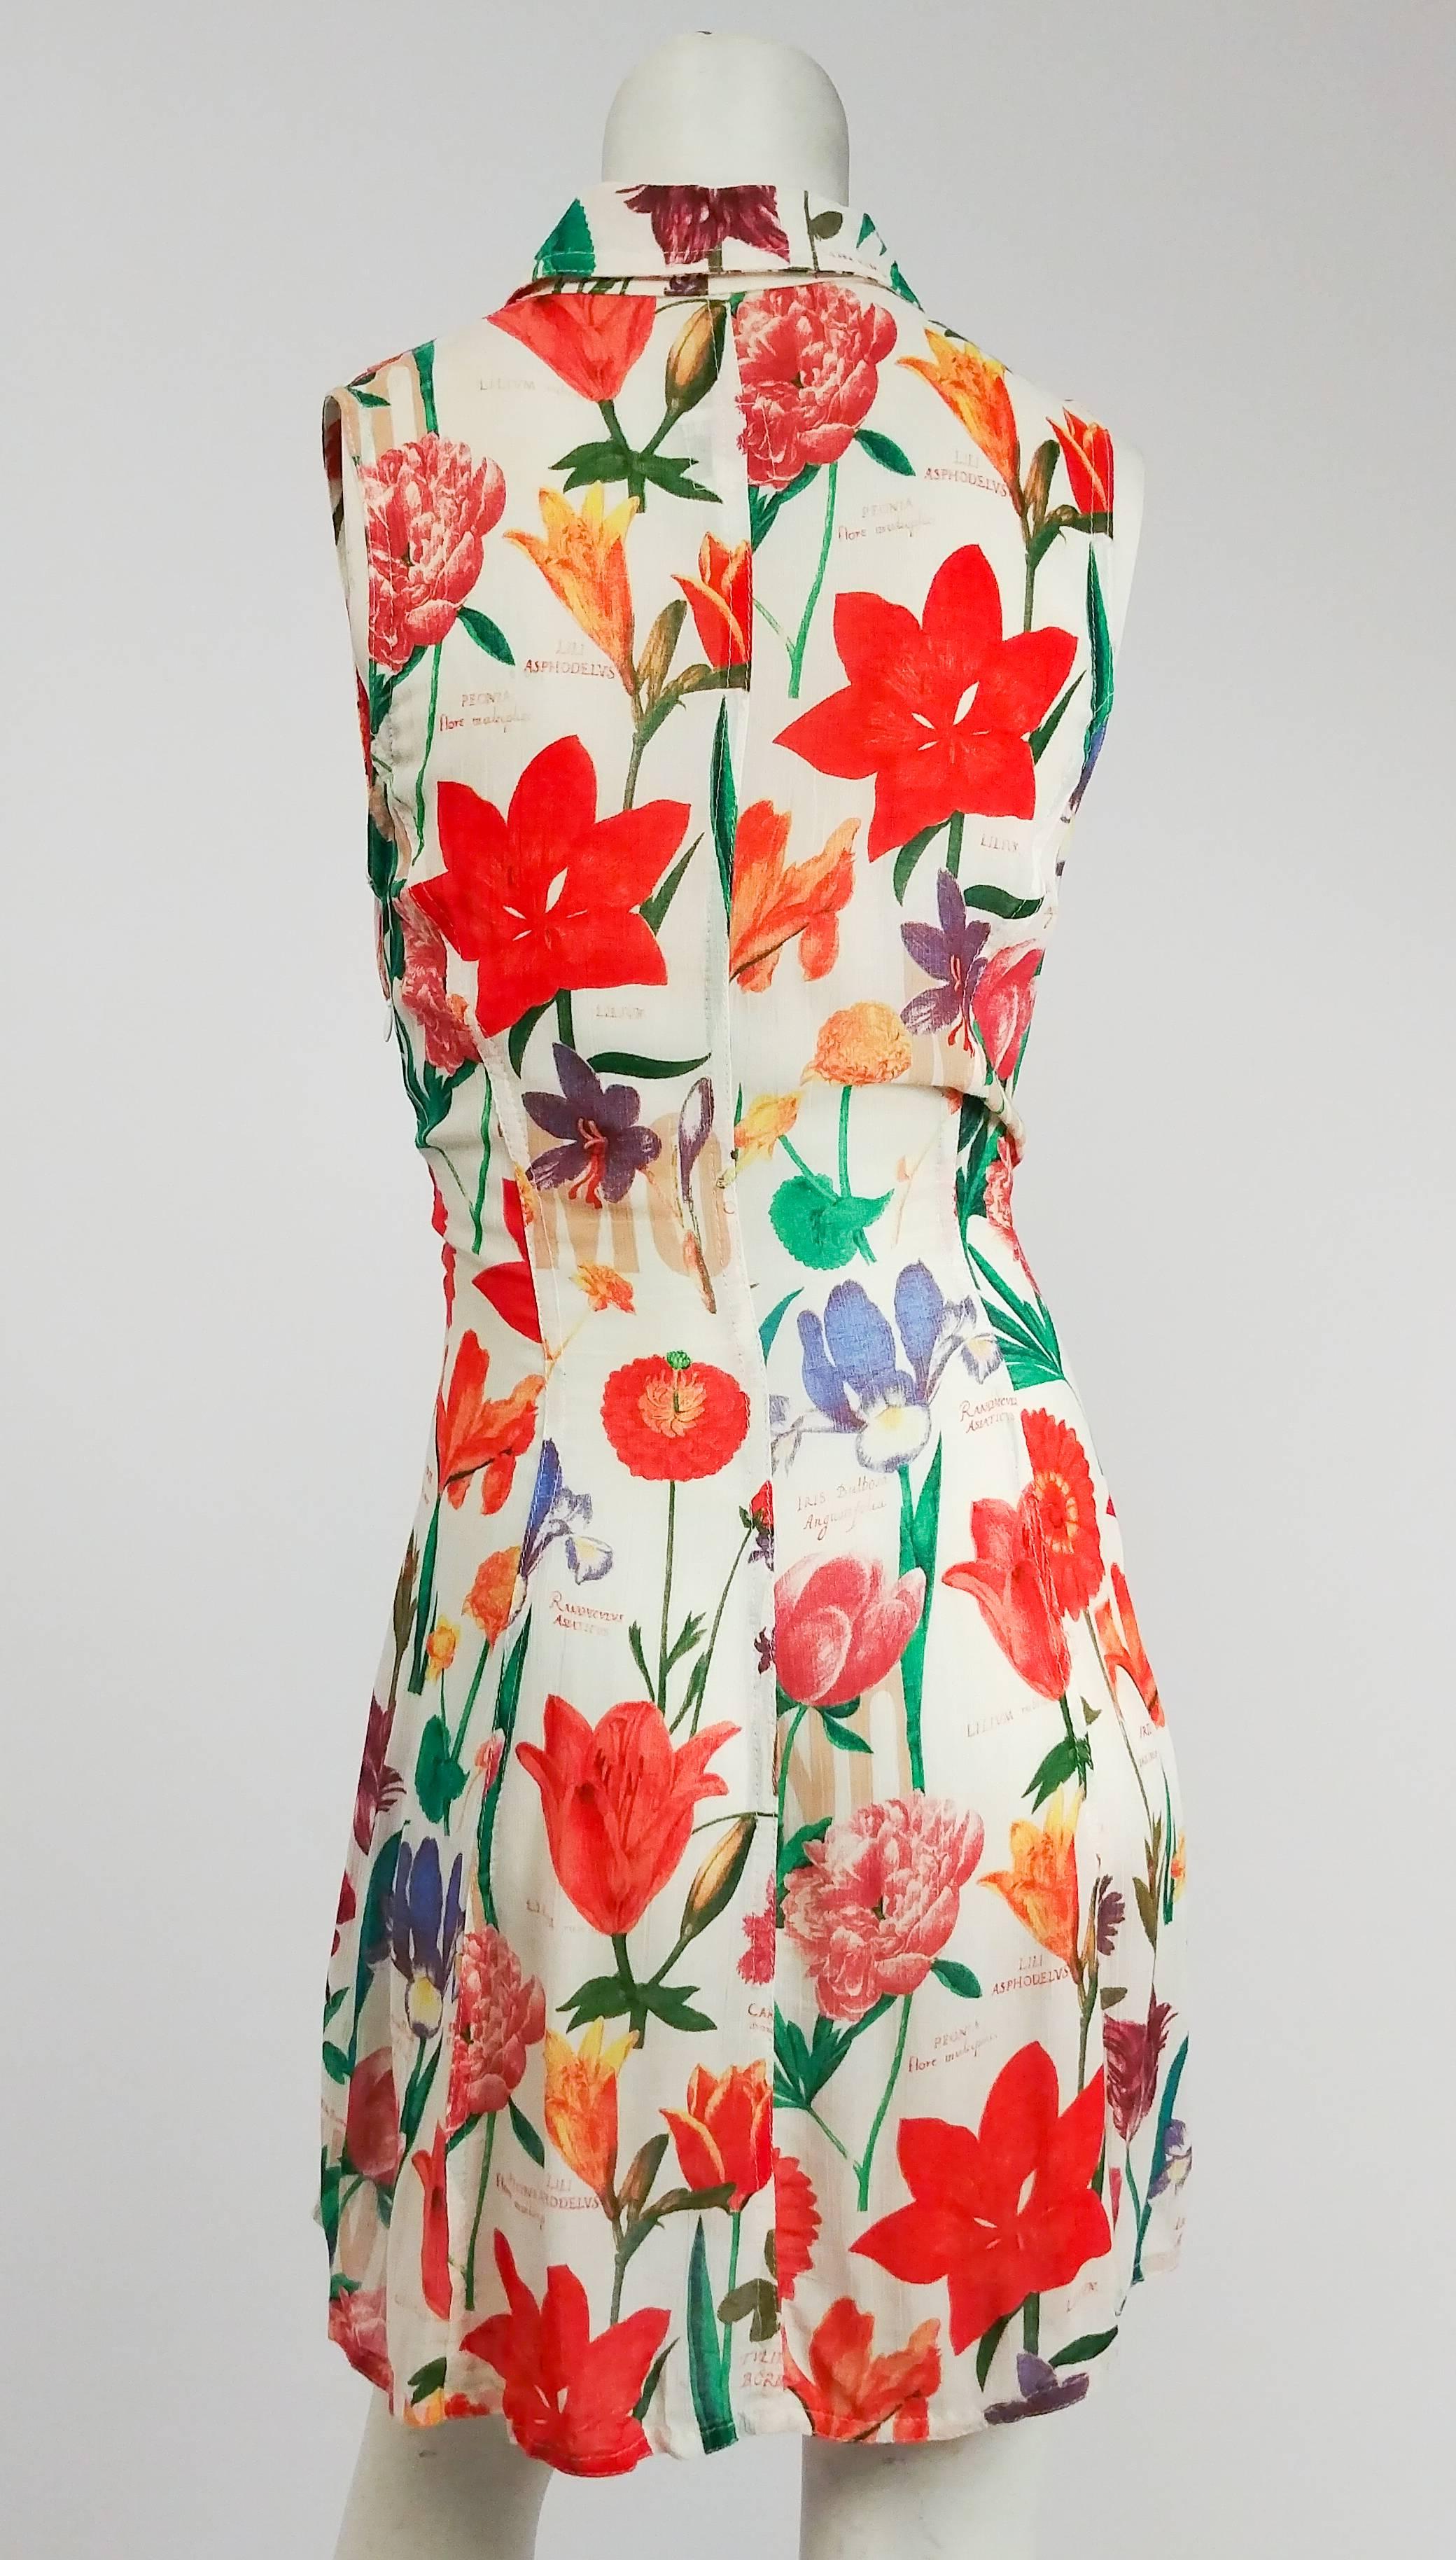 Moschino Floral Printed Tie Front Dress. Button down bodice ties in front to reveal midriff. Elasticated band on skirt. 